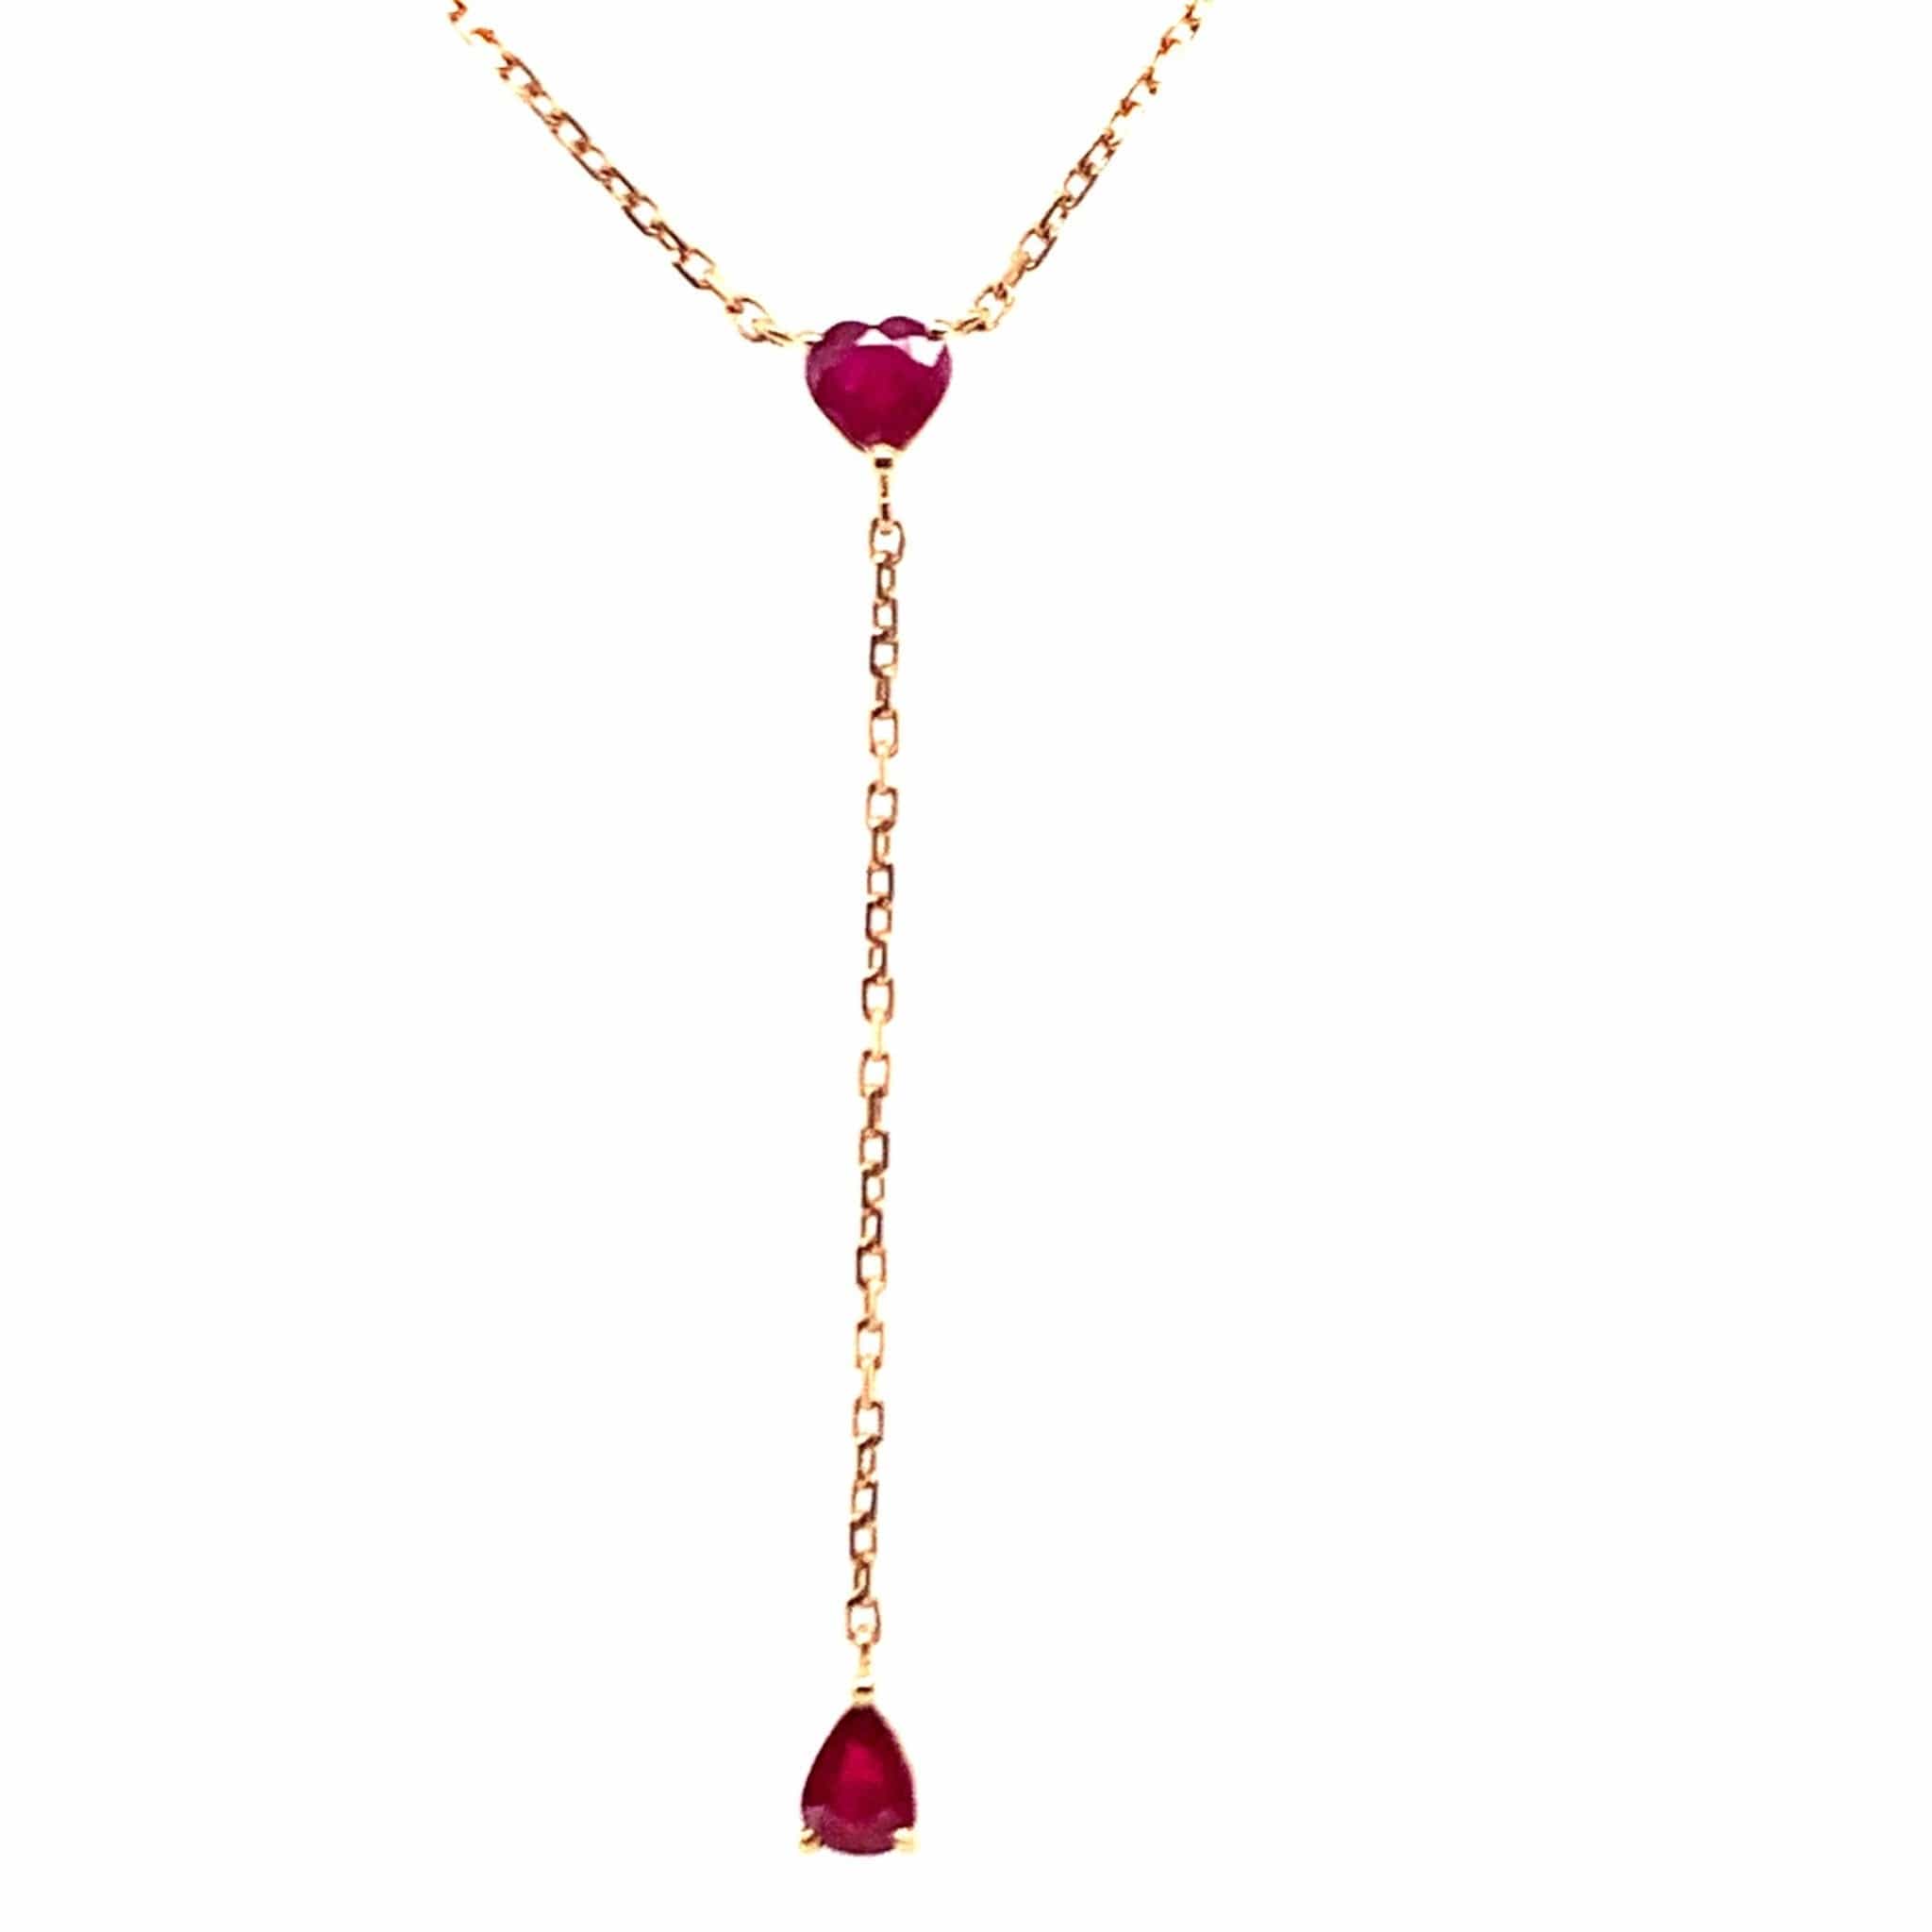 M.Fitaihi Forever Yours - Yellow Gold with Ruby Chain Drop Necklace - M.Fitaihi